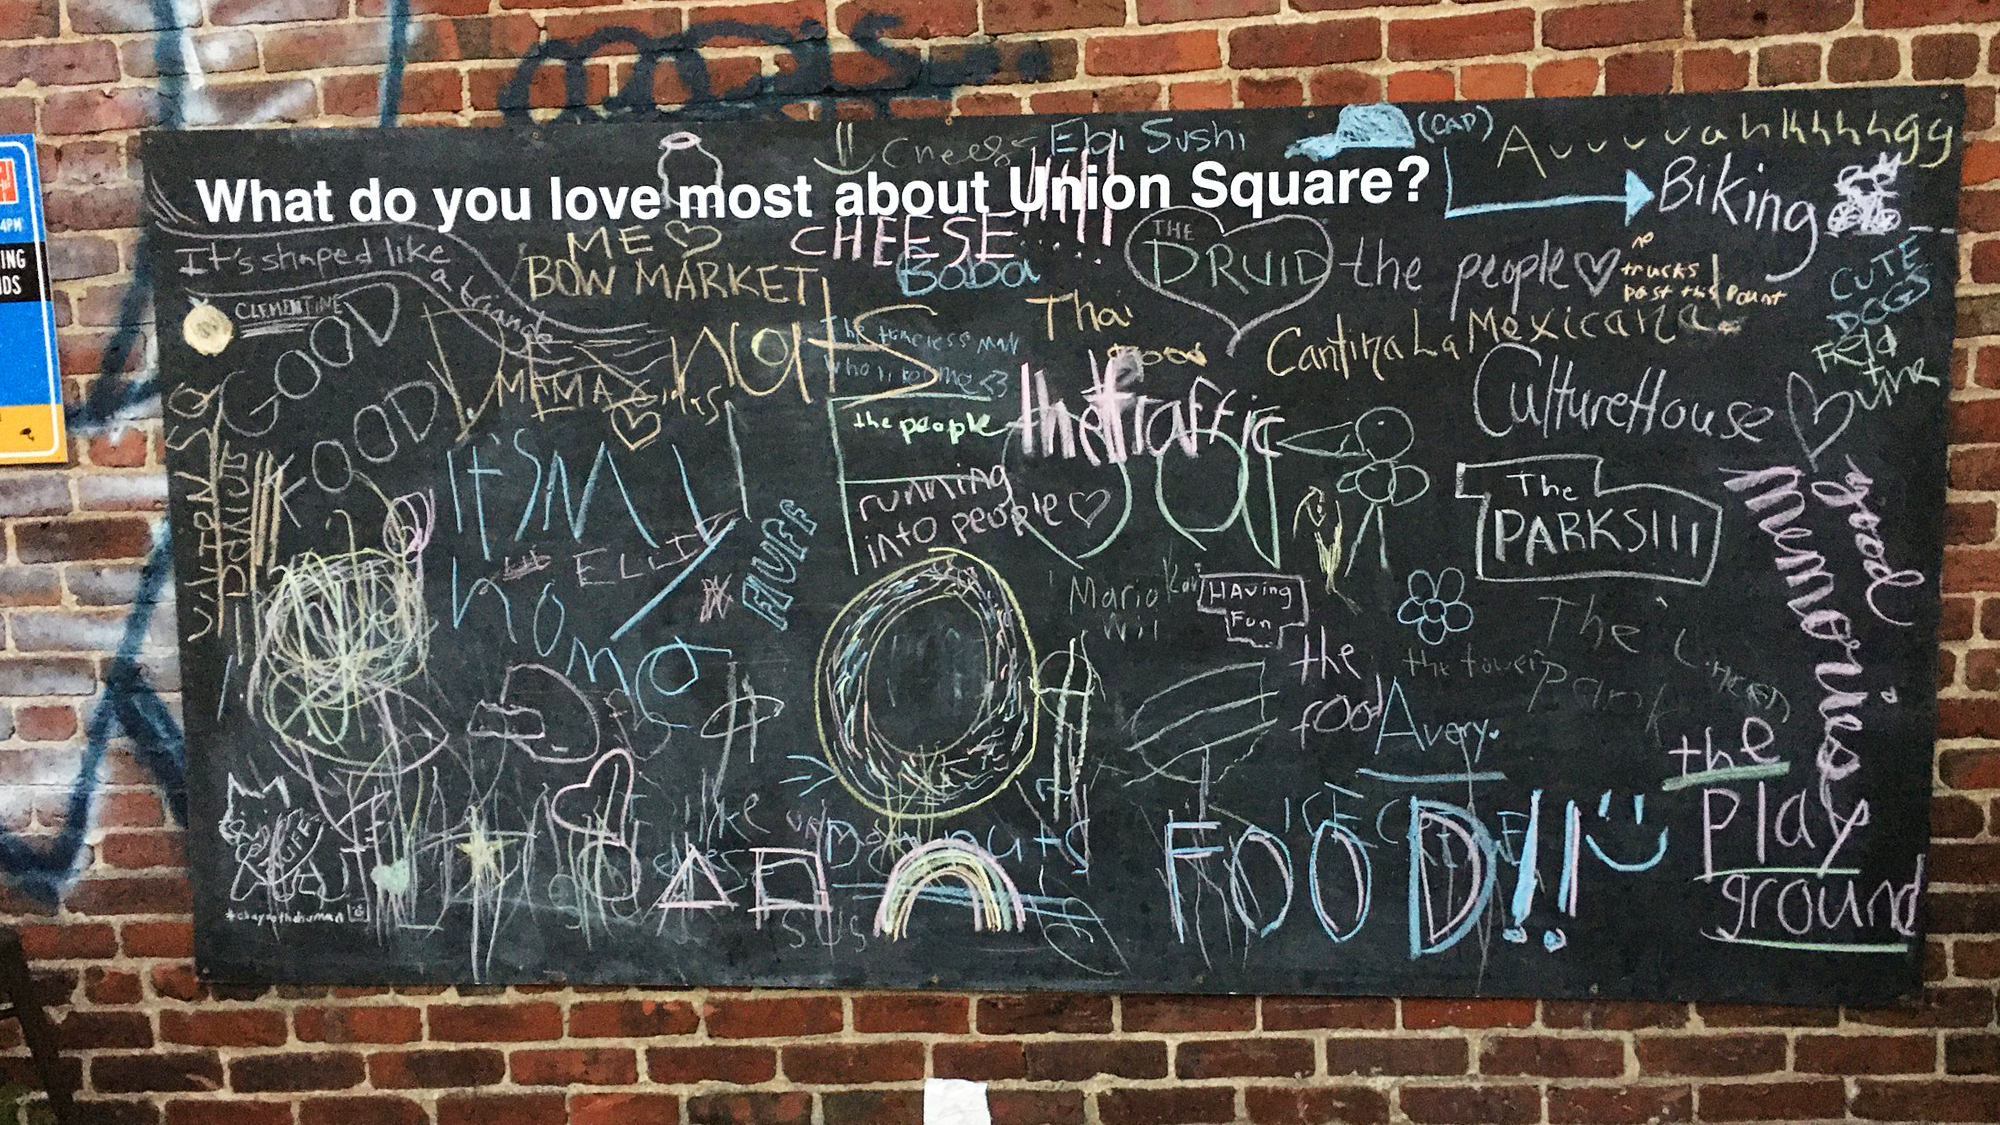 A chalkboard on a brick wall with the prompt "What do you love most about Union Square?" Various responses are written on the chalkboard with chalk.